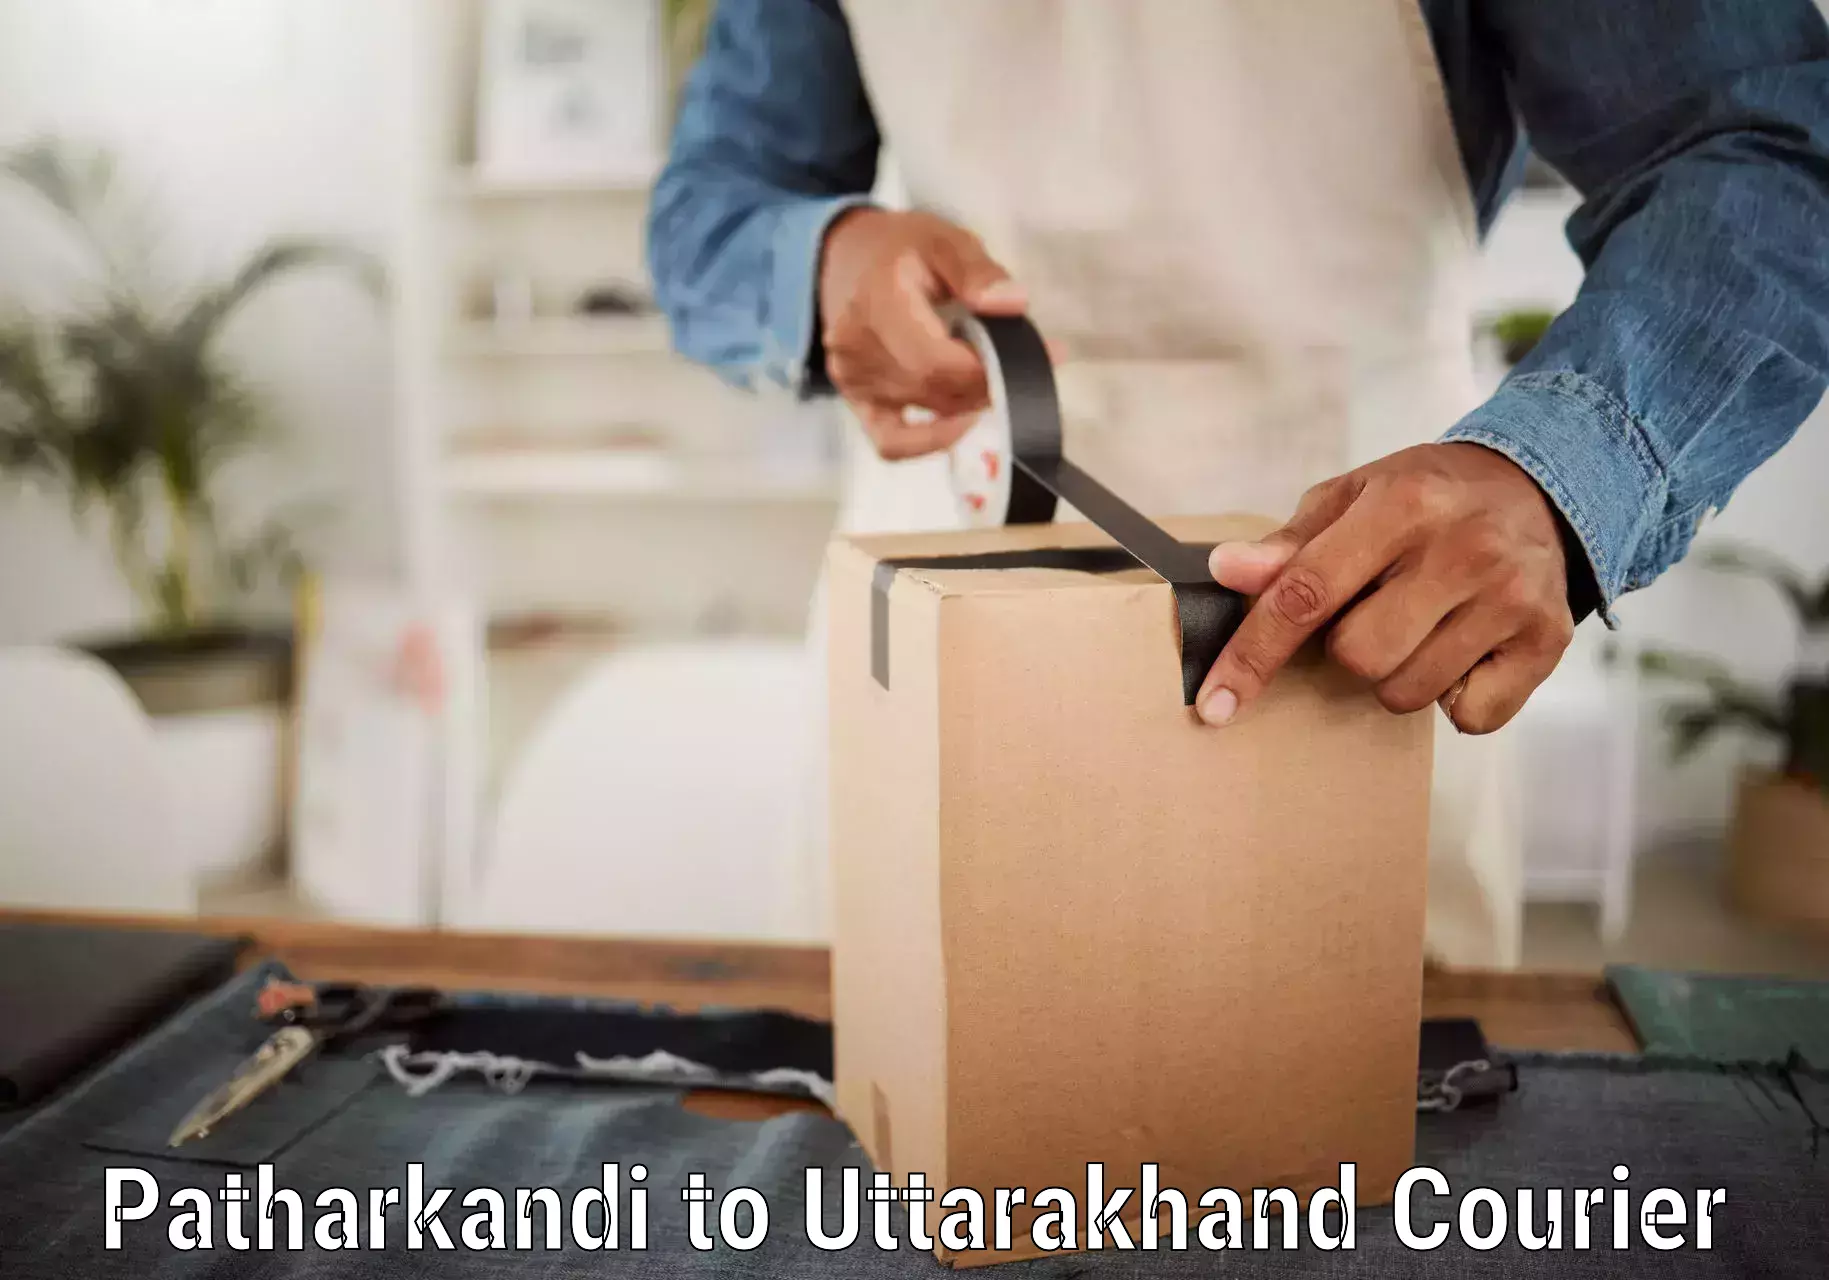 Reliable delivery network Patharkandi to Uttarakhand